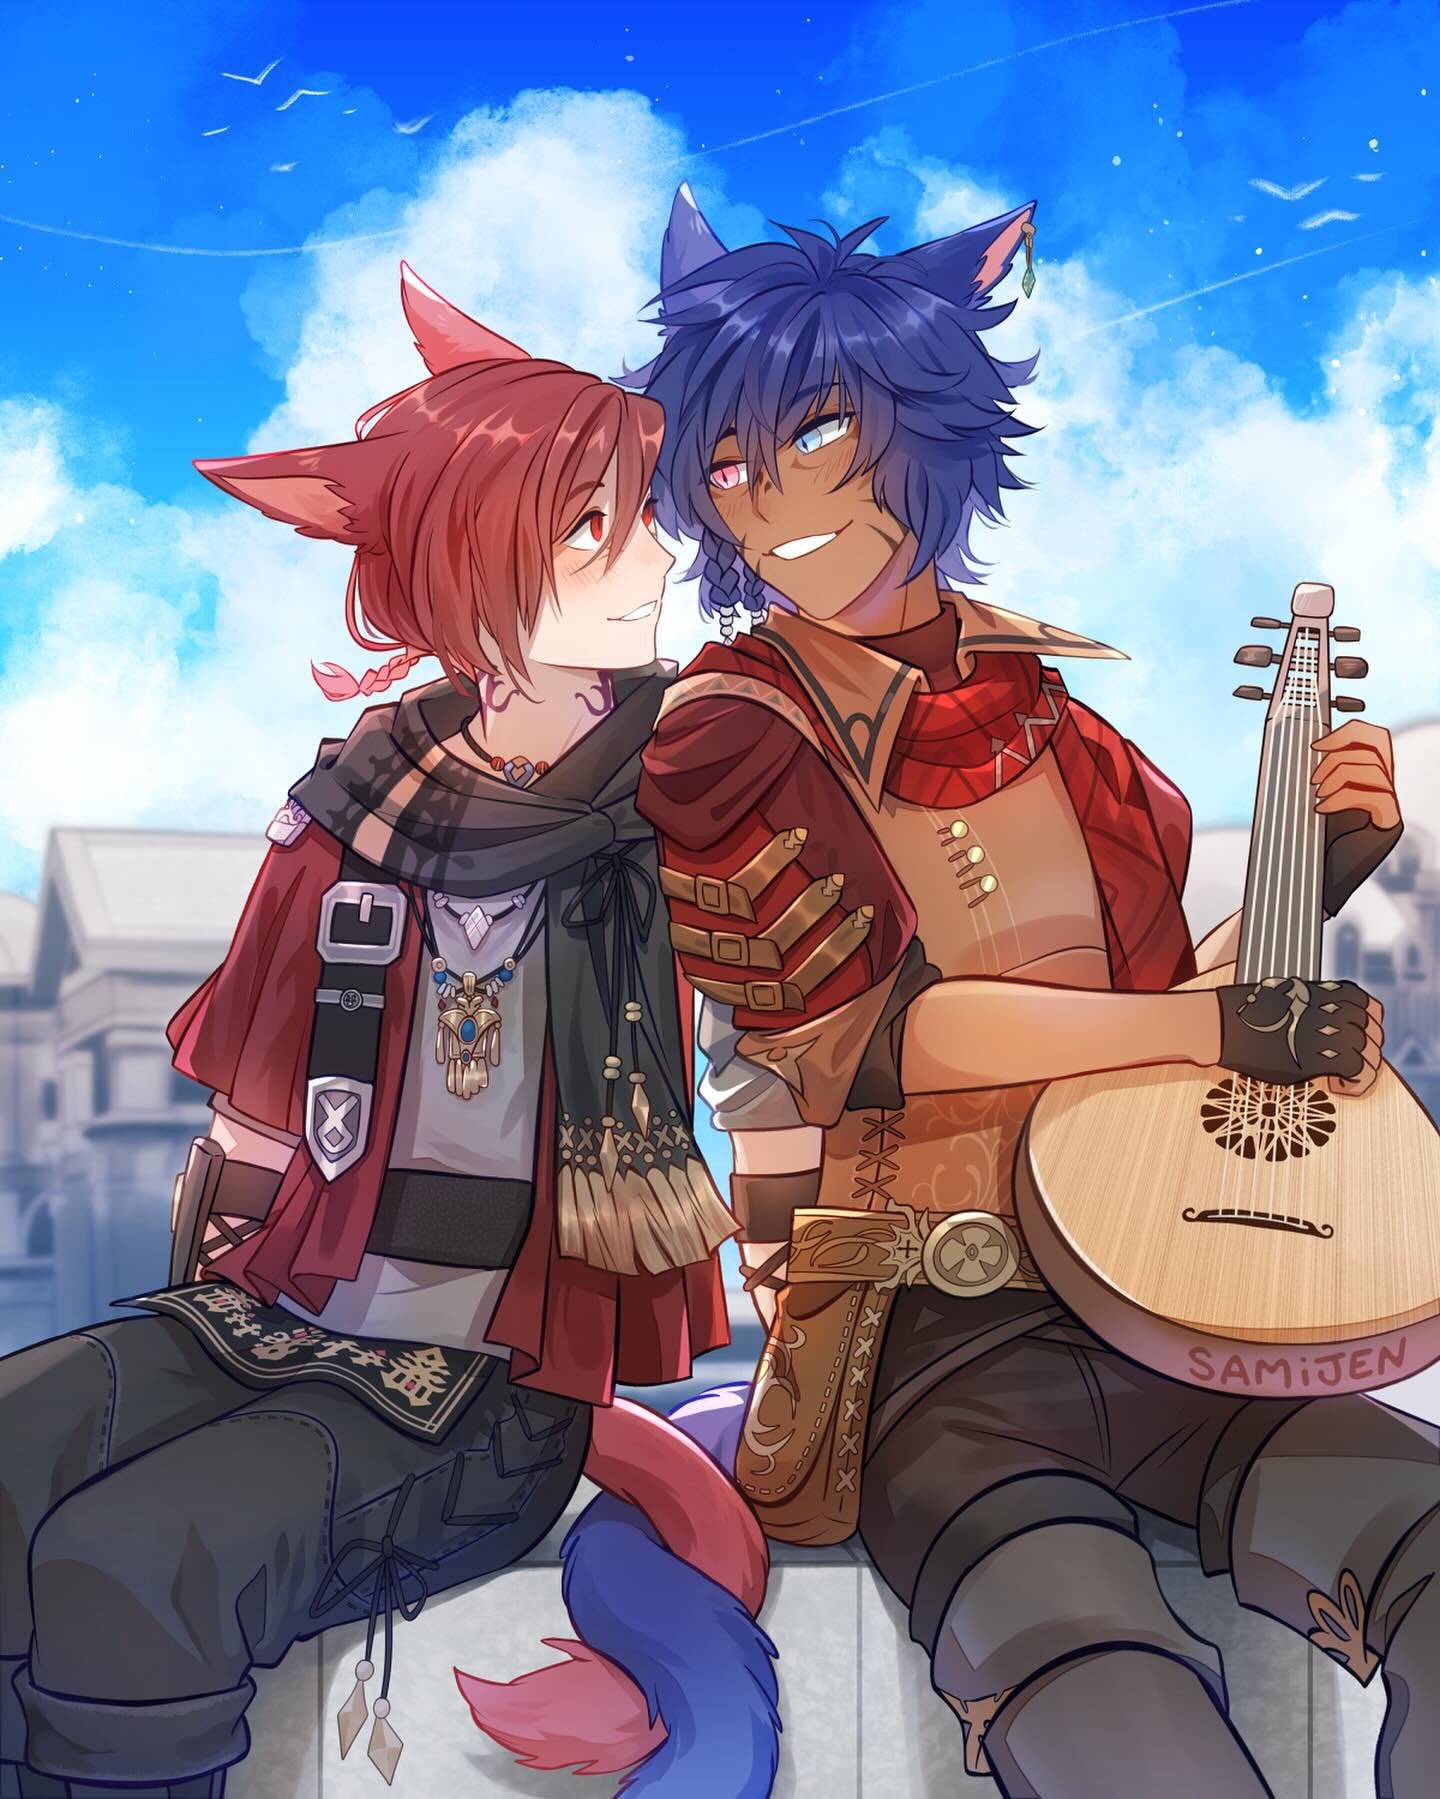 Commission for @/everfinite 🎶

Art made by me using #clipstudiopaint 

#ffxiv #wolgraha #grahatia